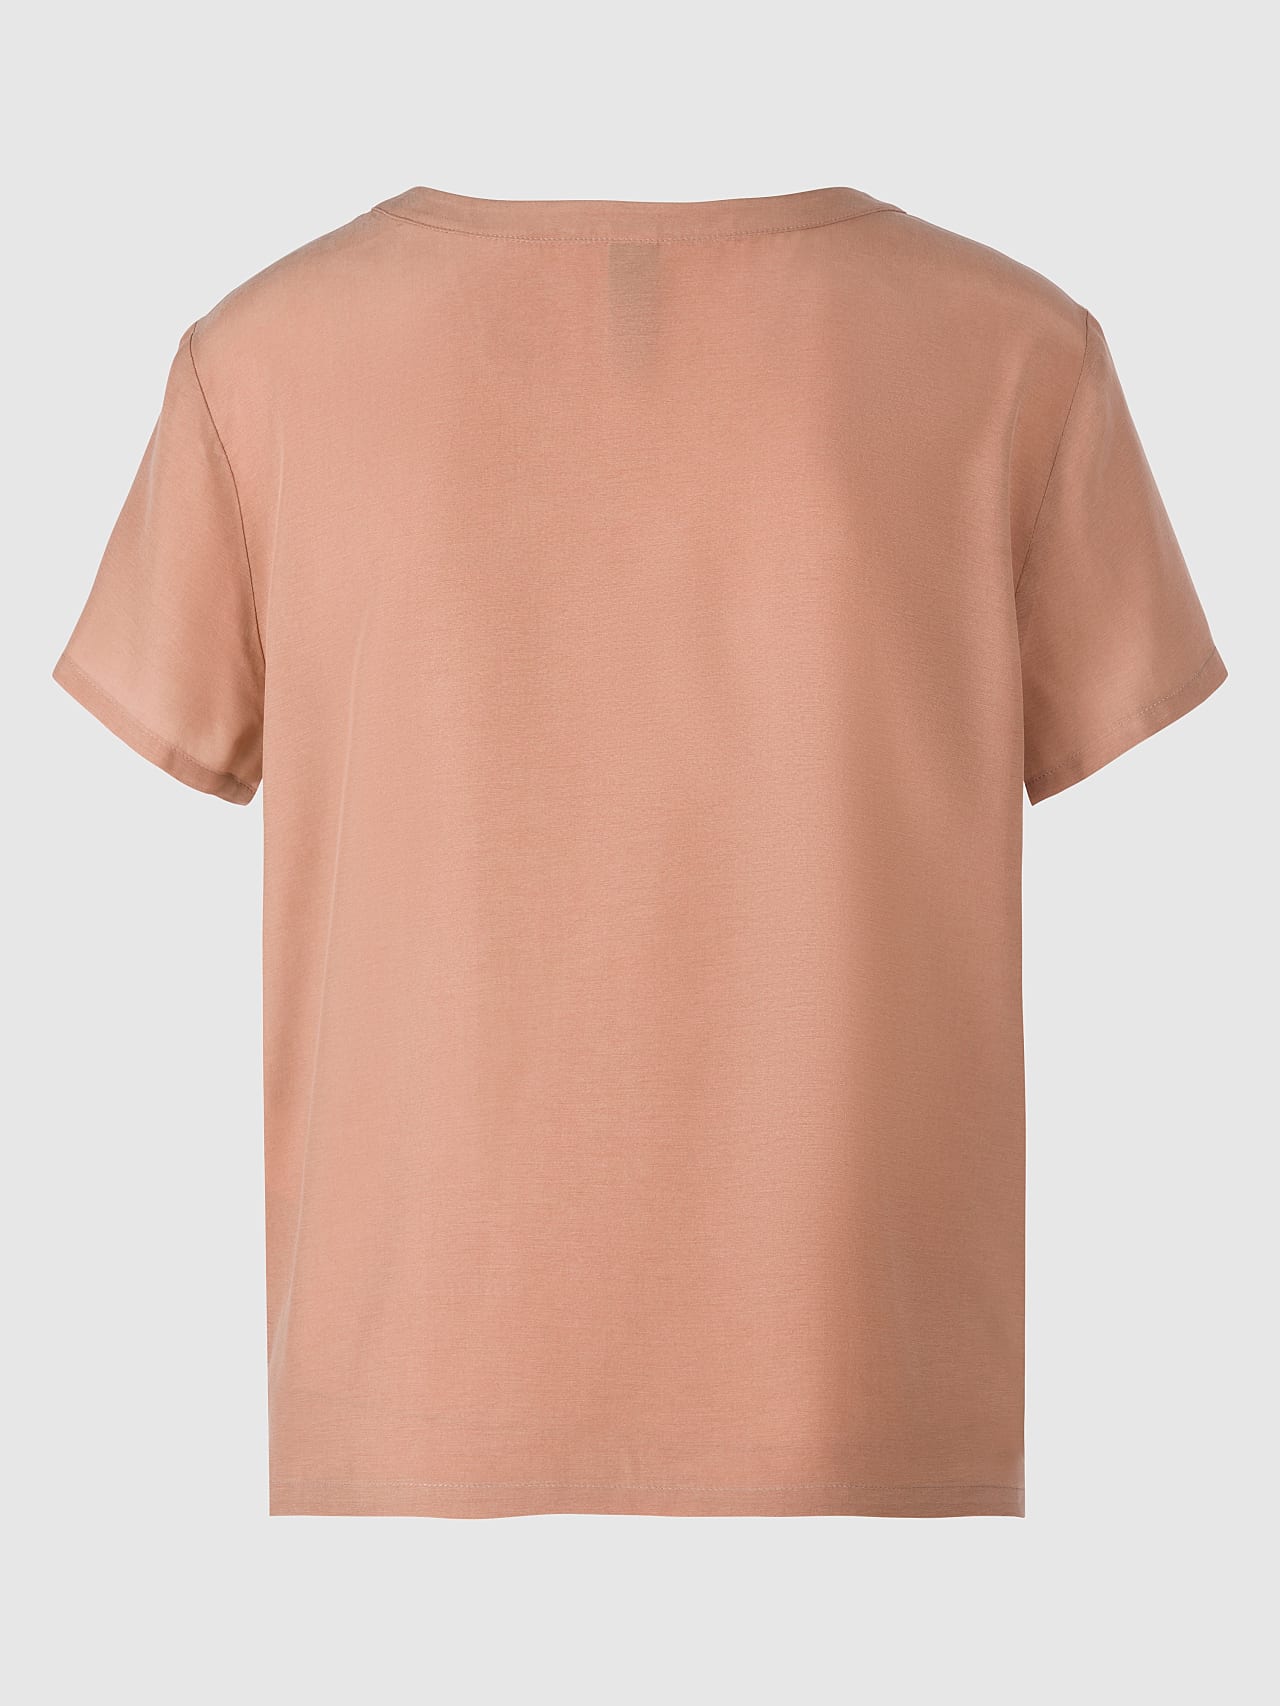 AlphaTauri | WOLAM V2.Y5.01 | Silk Touch Cupro T-Shirt in rose for Women